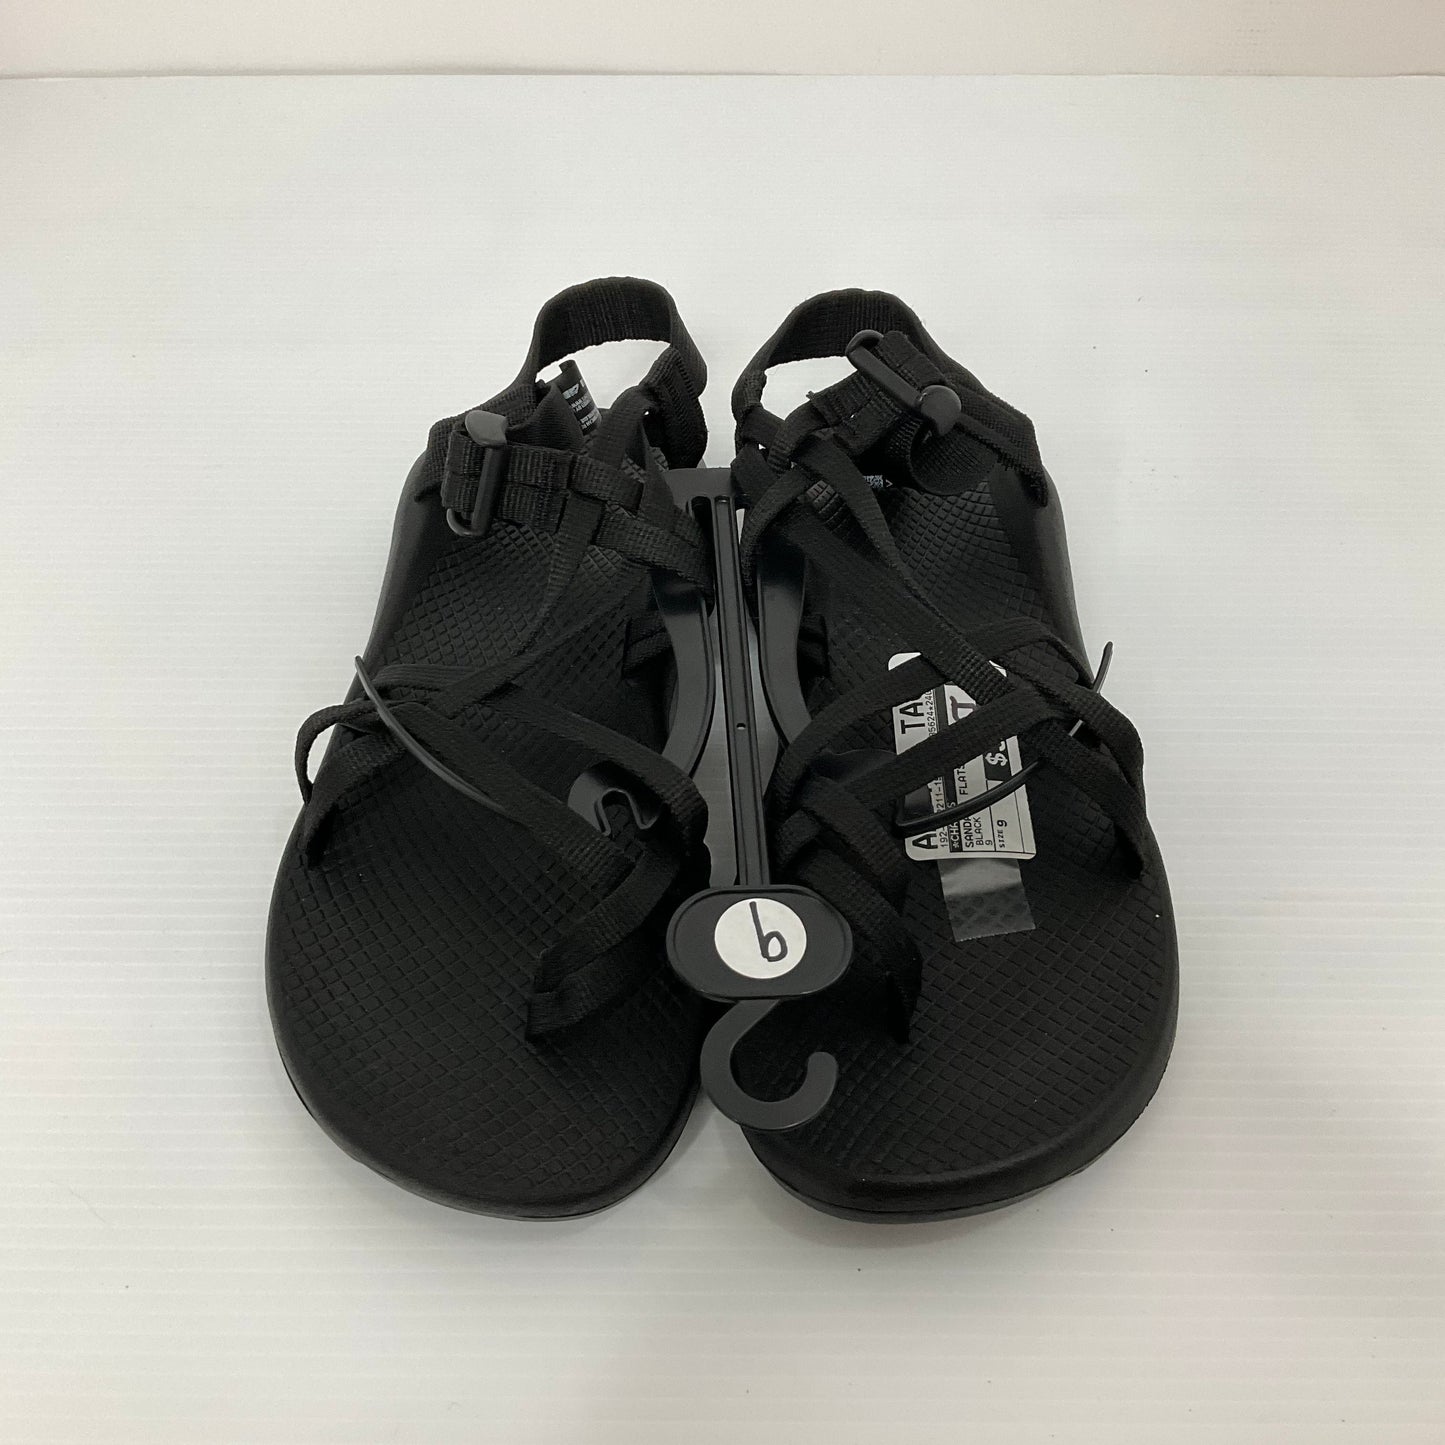 Black Sandals Flats Chacos, Size 9